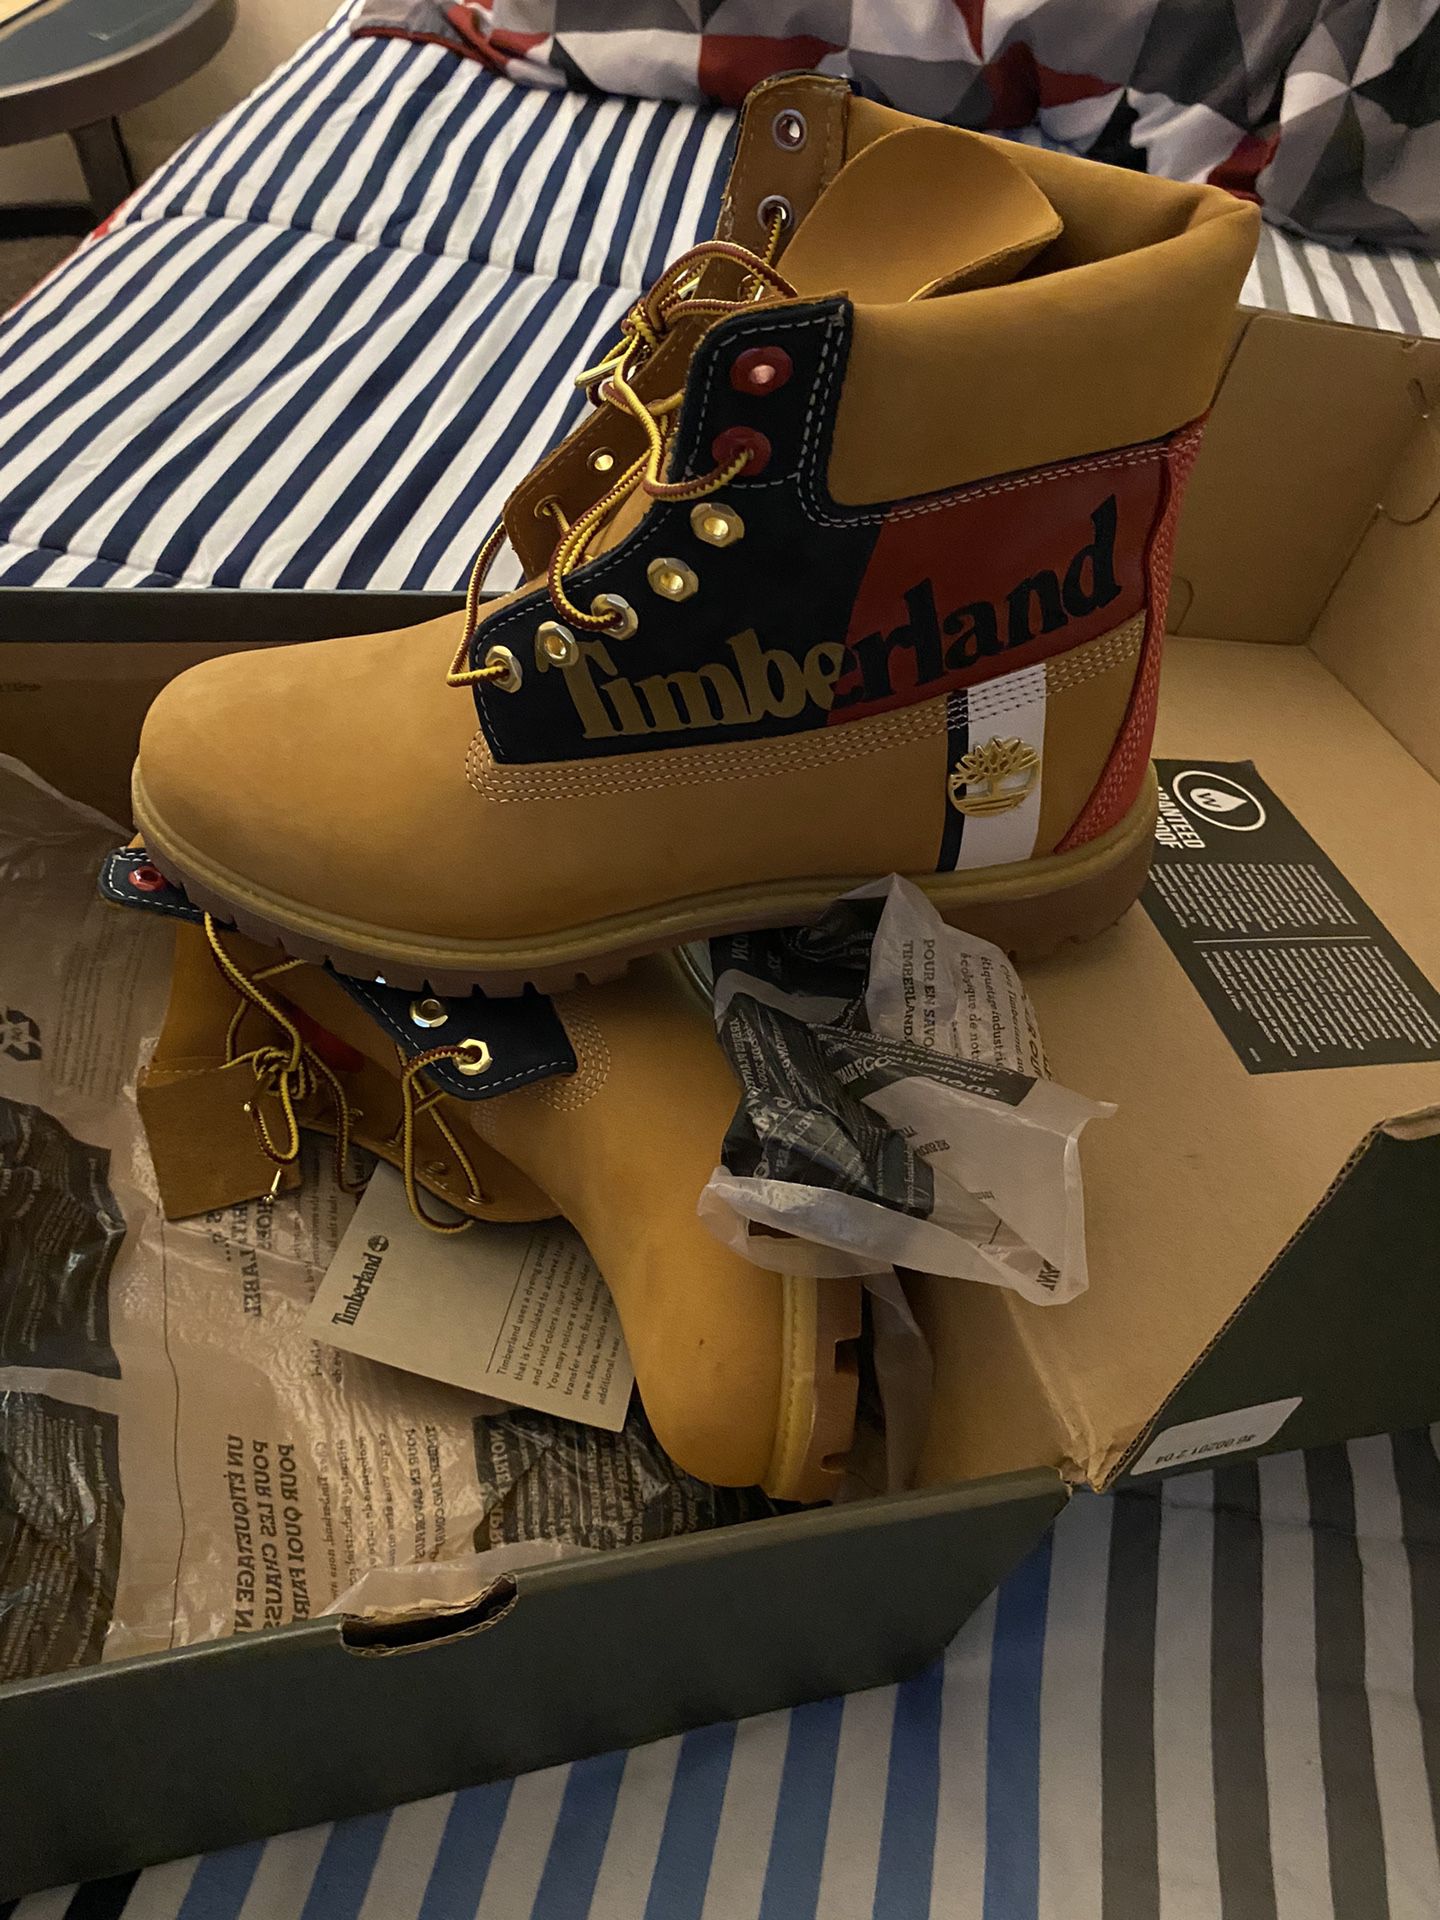 længes efter midlertidig Nordamerika TIMBERLAND PREMIUM WATER PROOF BOOT FOR MEN WHEAT NUBUCK RED & BLUE TIMBERLAND  BOOTS for Sale in Rochester, NY - OfferUp